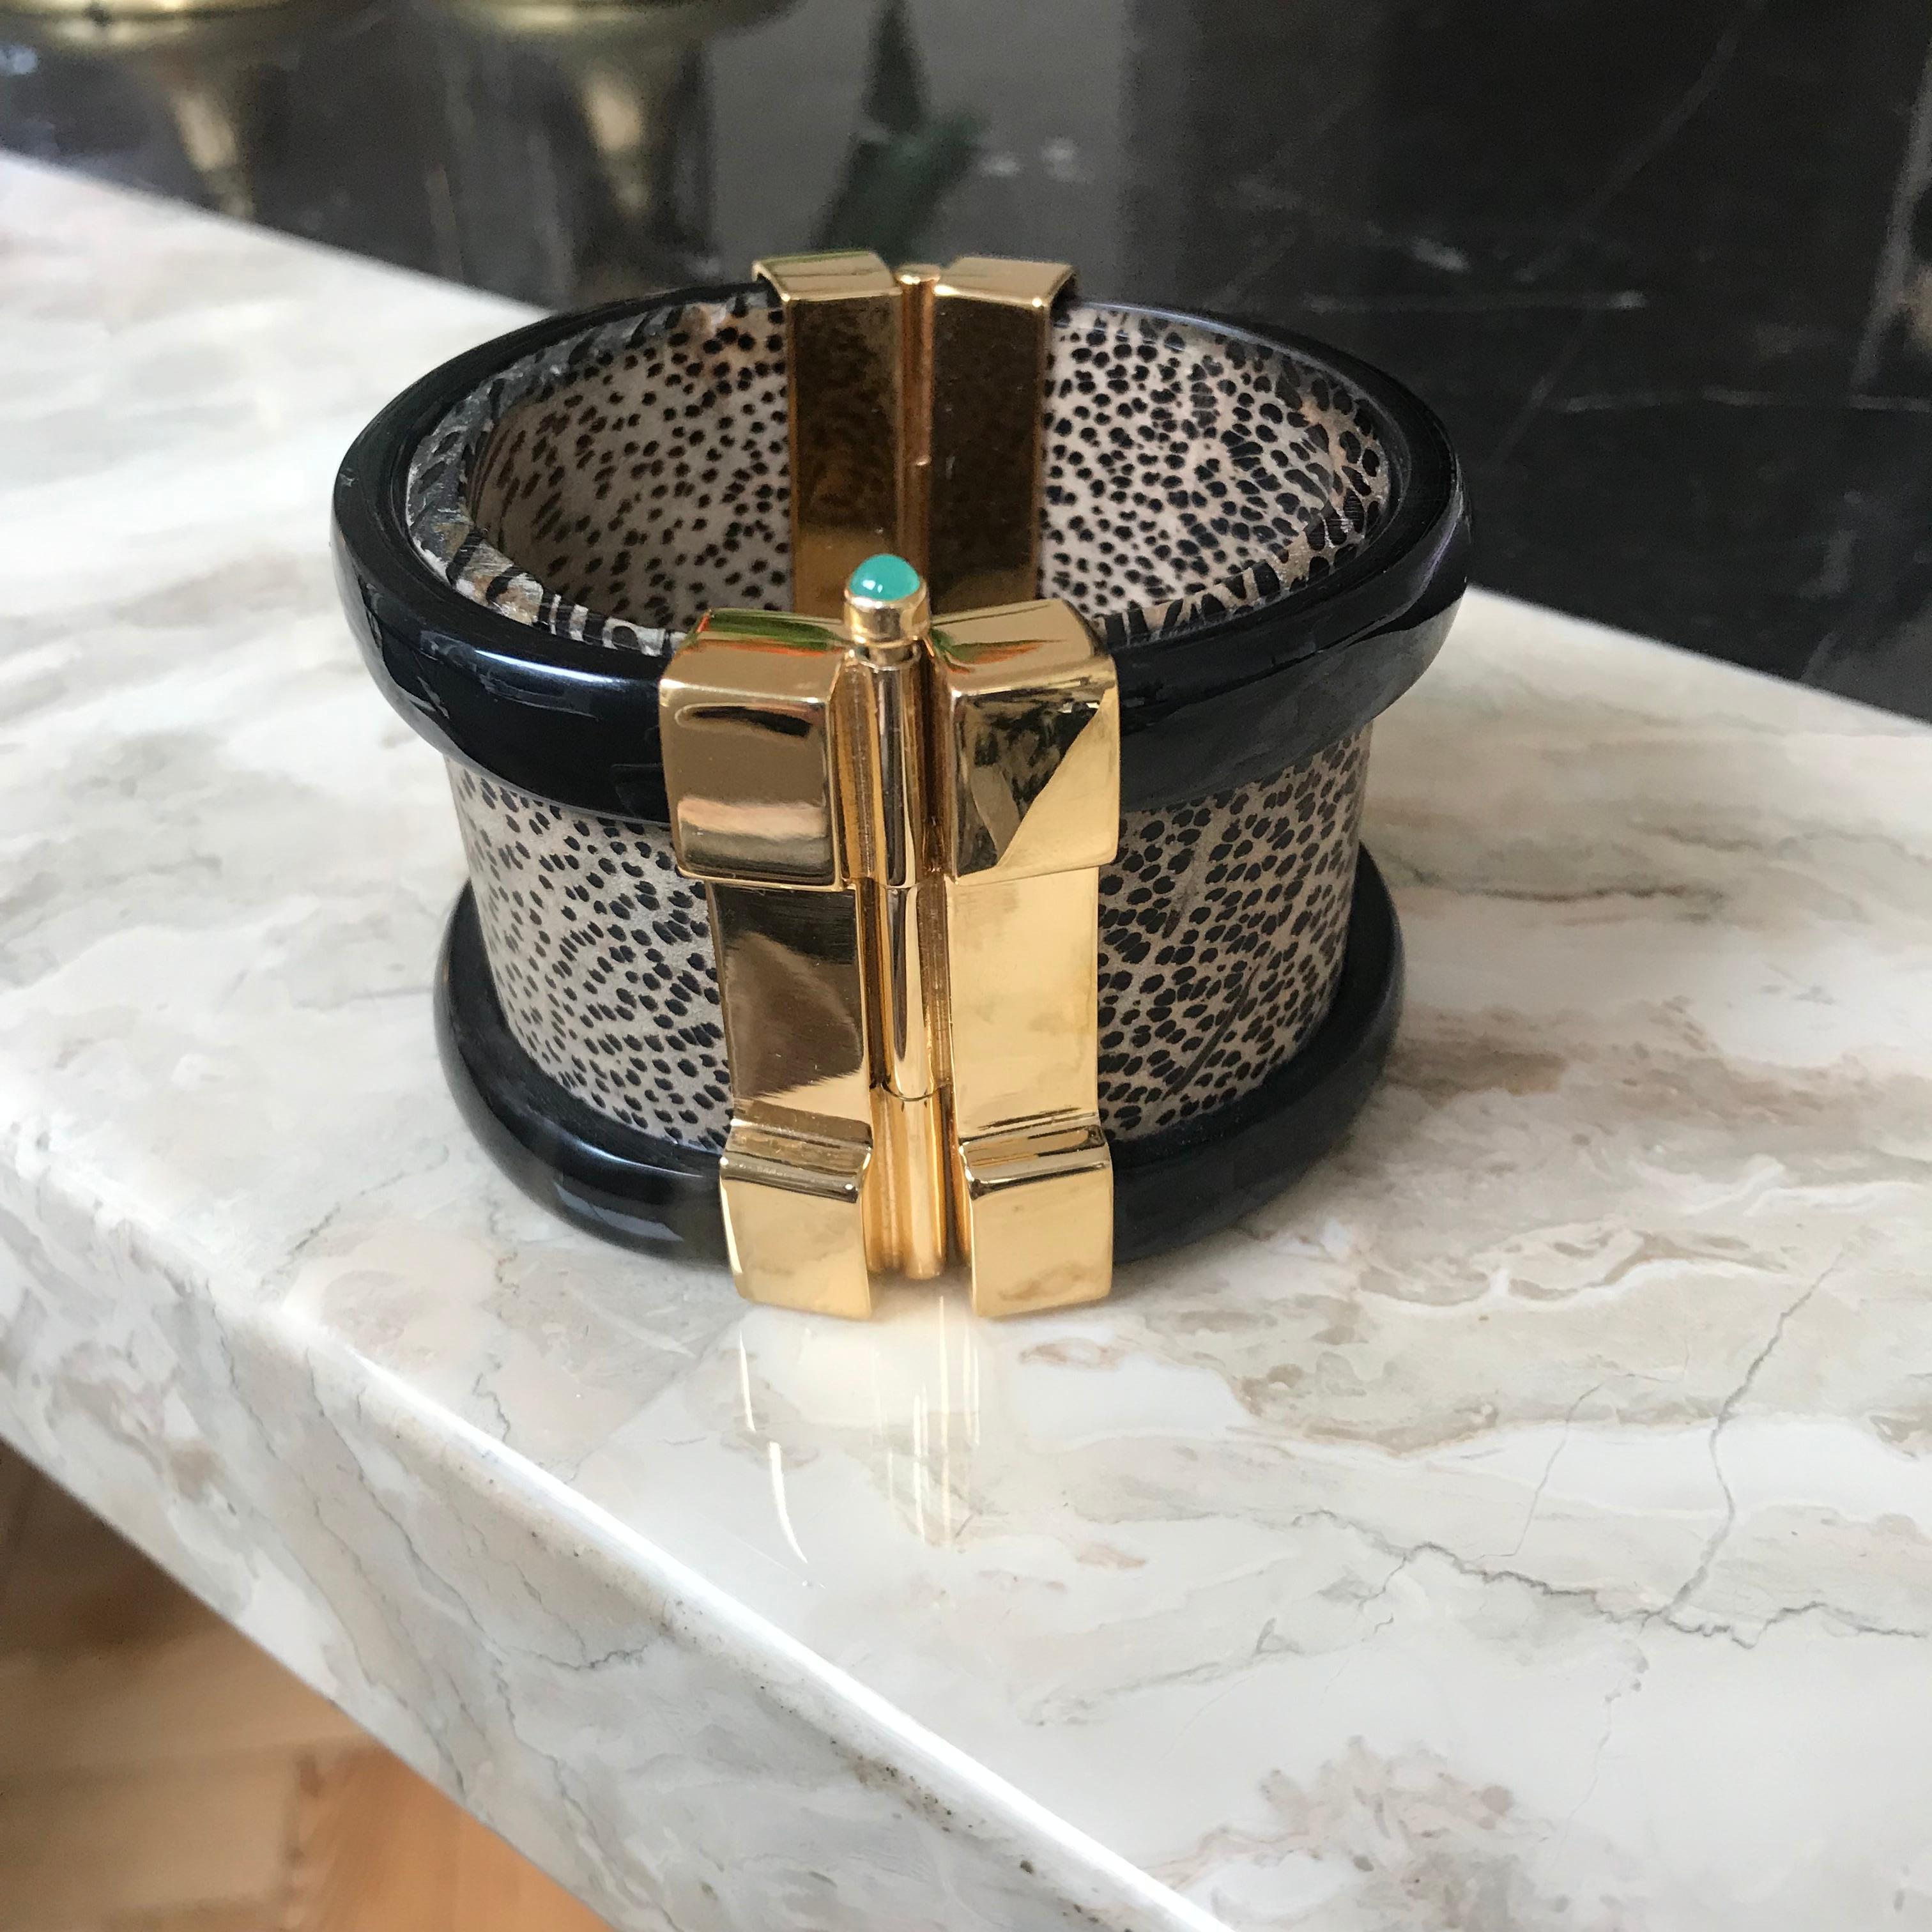 Cuff bracelet made from African wood and cow horn; customizable pin-clasp available with emerald or ruby.

Inspired by warrior style cuffs worn by former Vogue editor Diana Vreeland. 

Each cuff is handmade from natural materials. Please note that